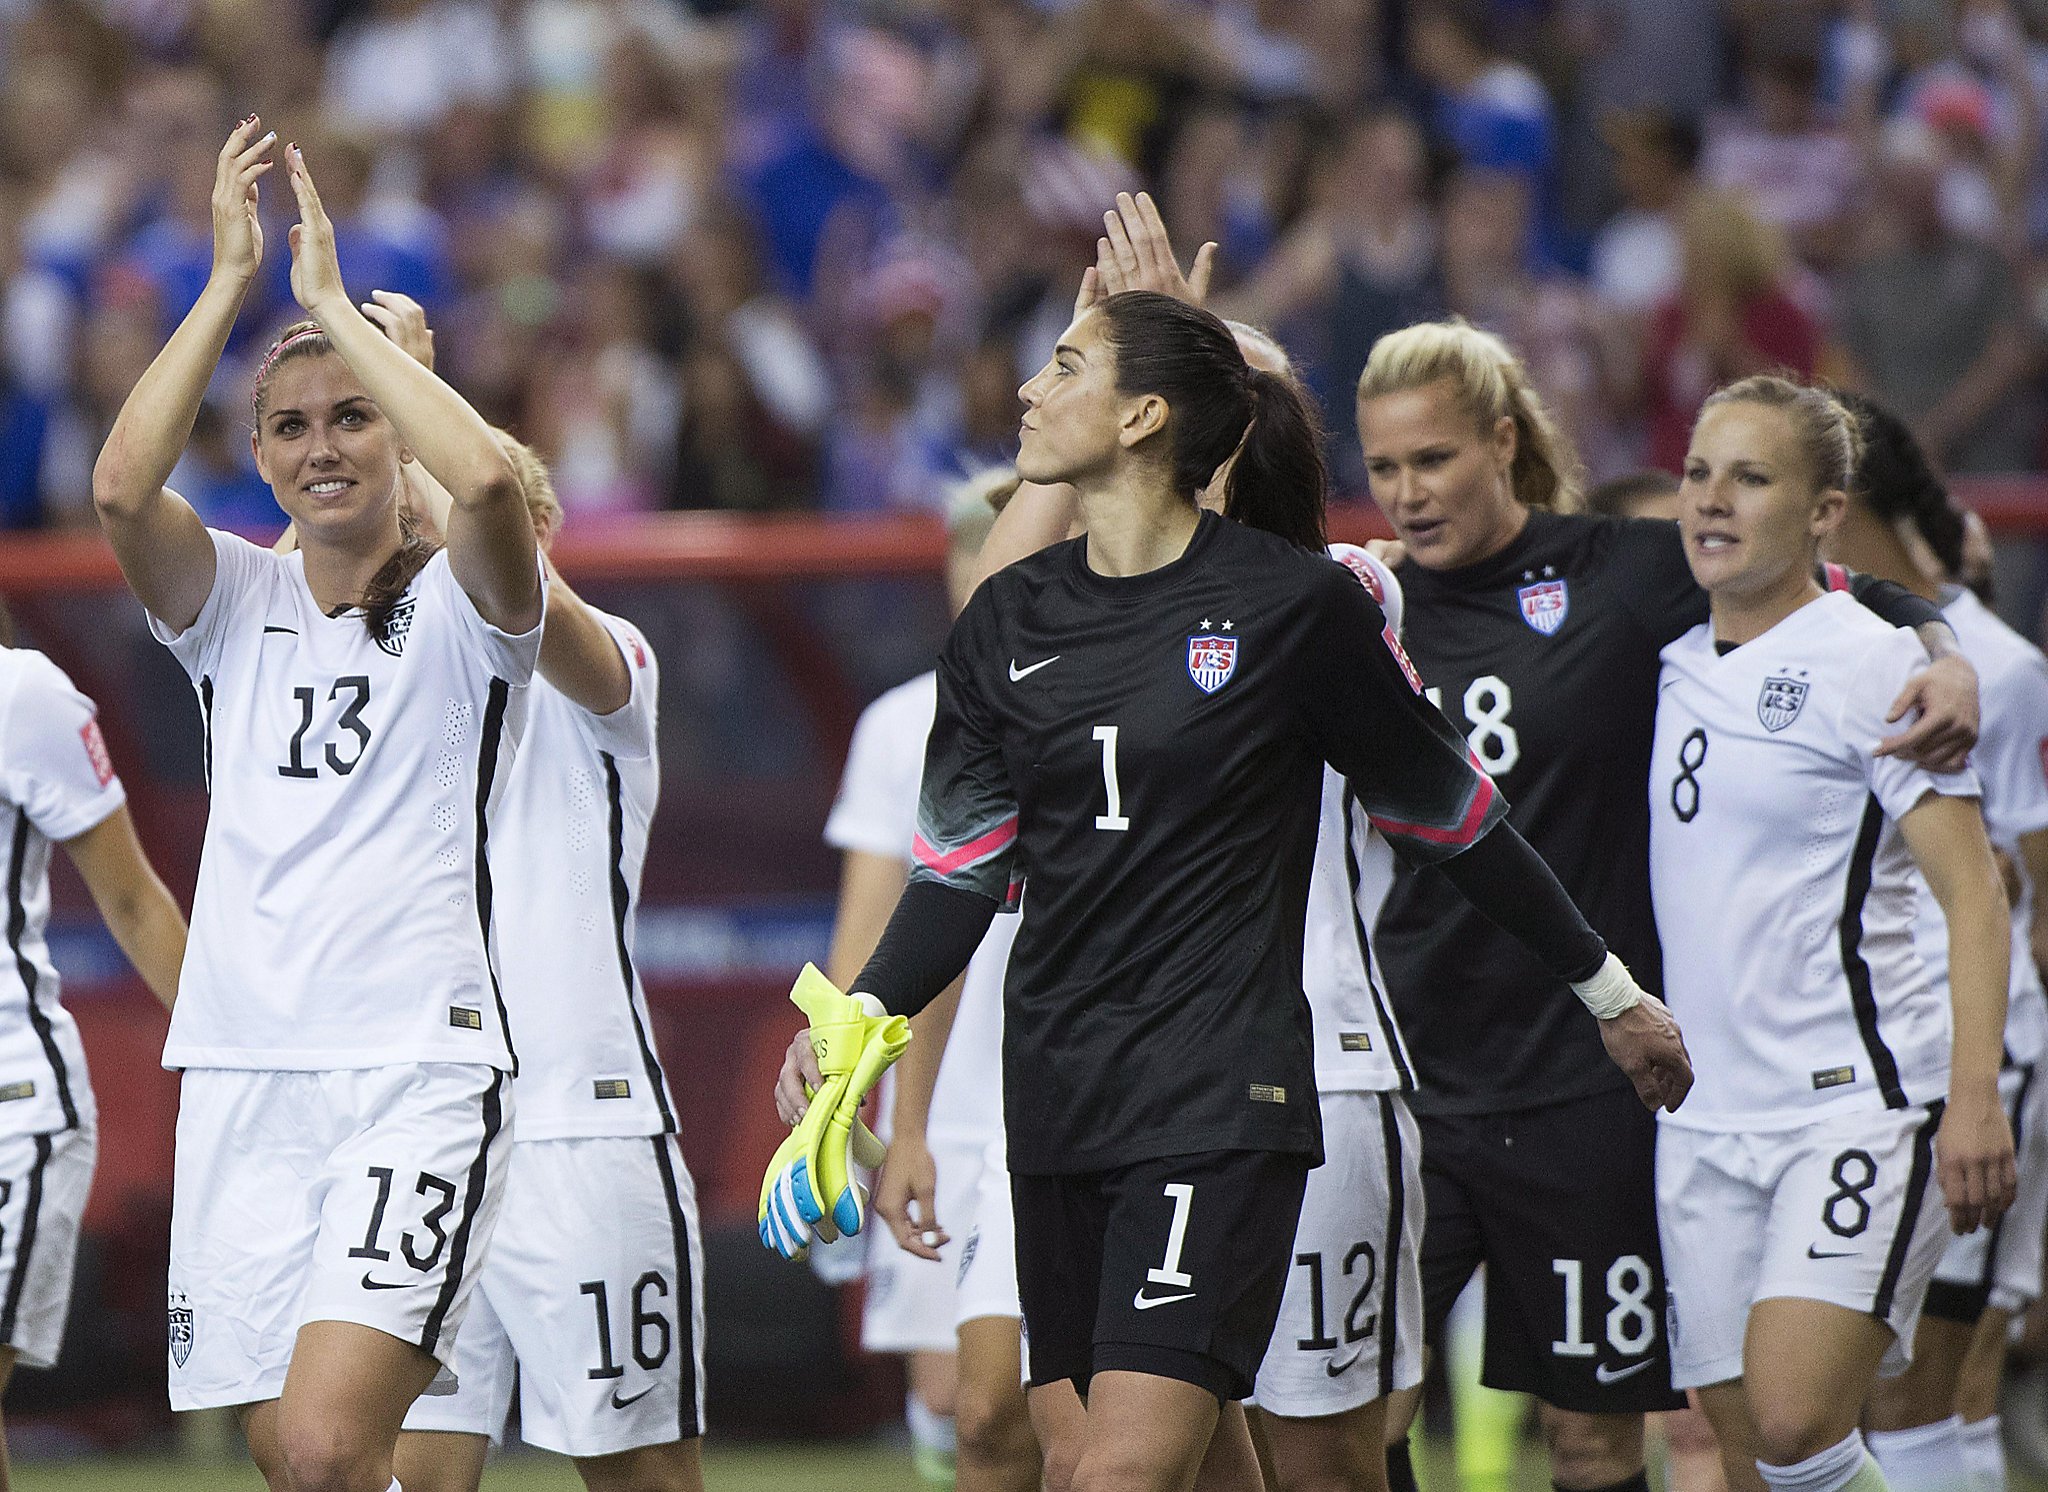 Killion For U.S. women, World Cup final a long time coming